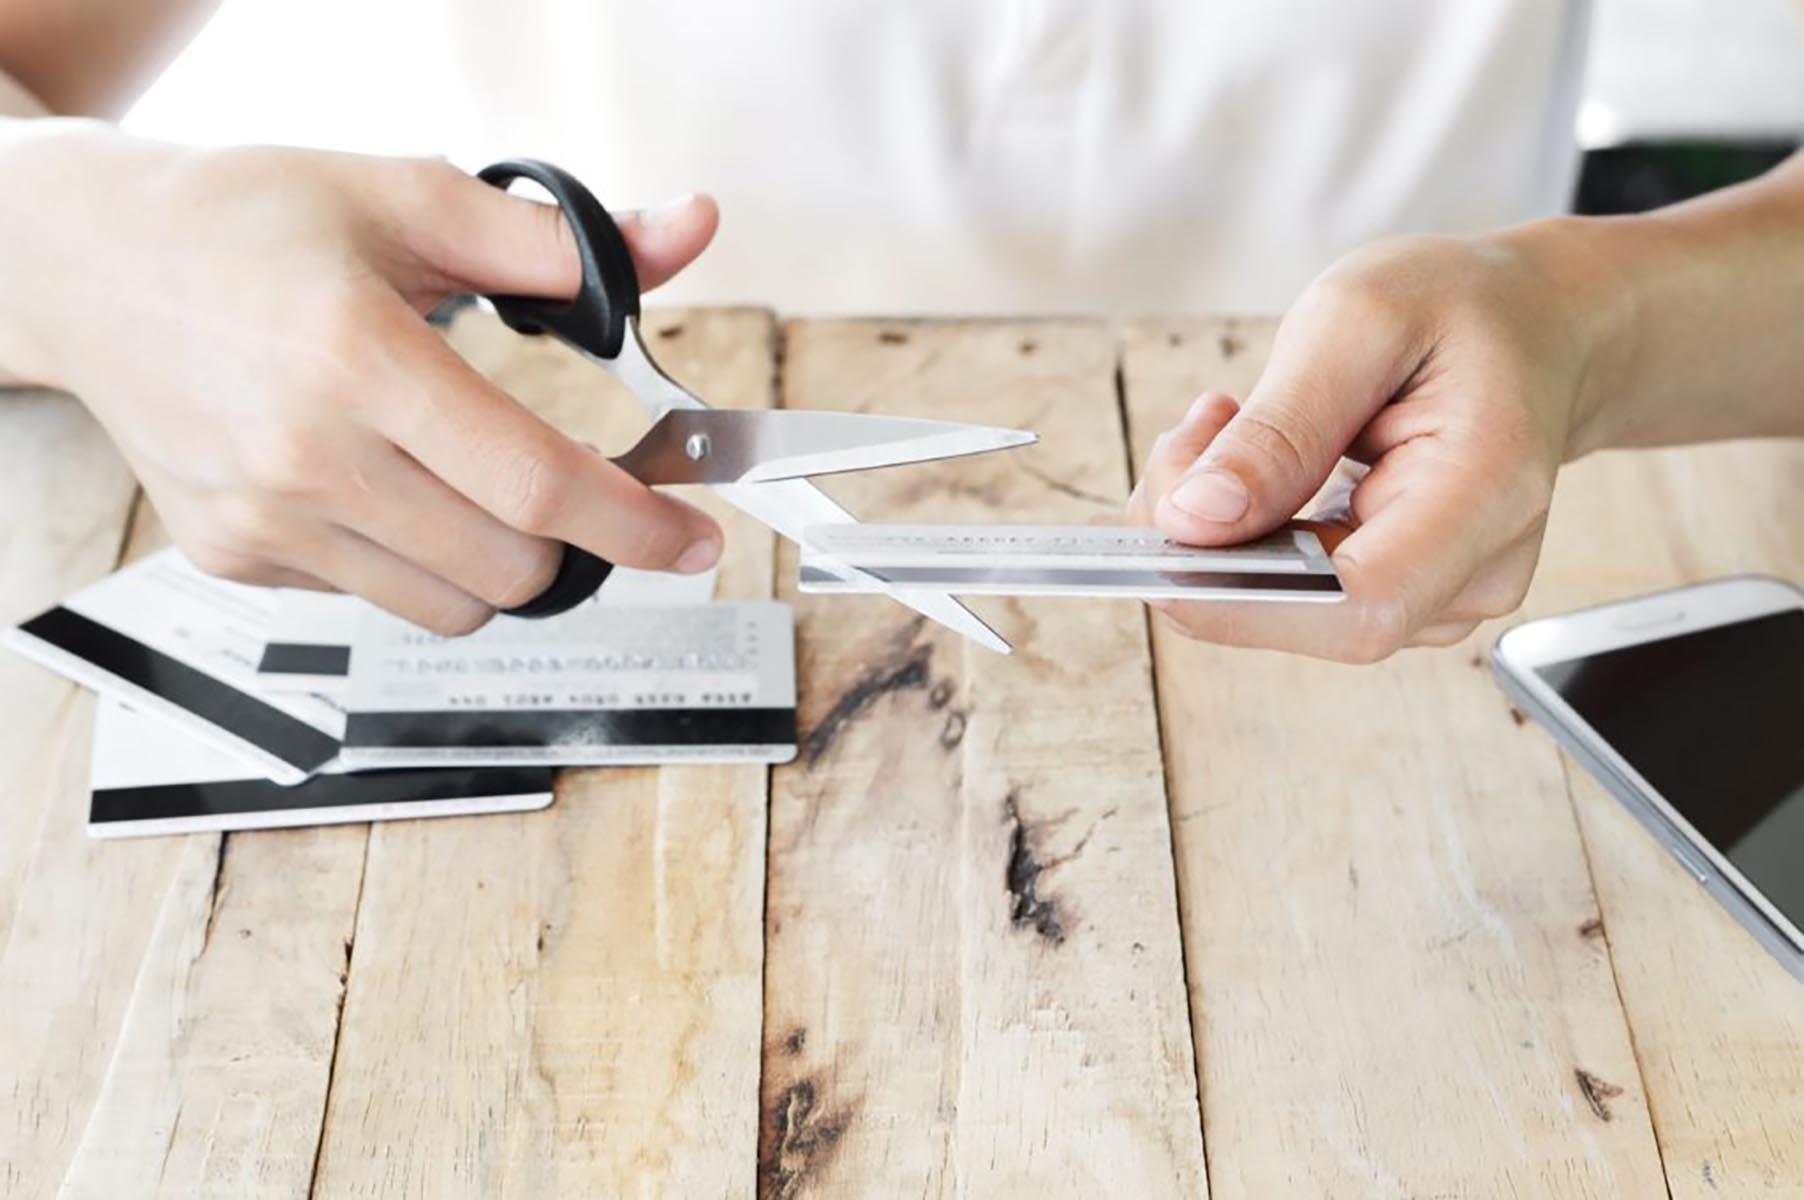 learn the process of closing a credit card